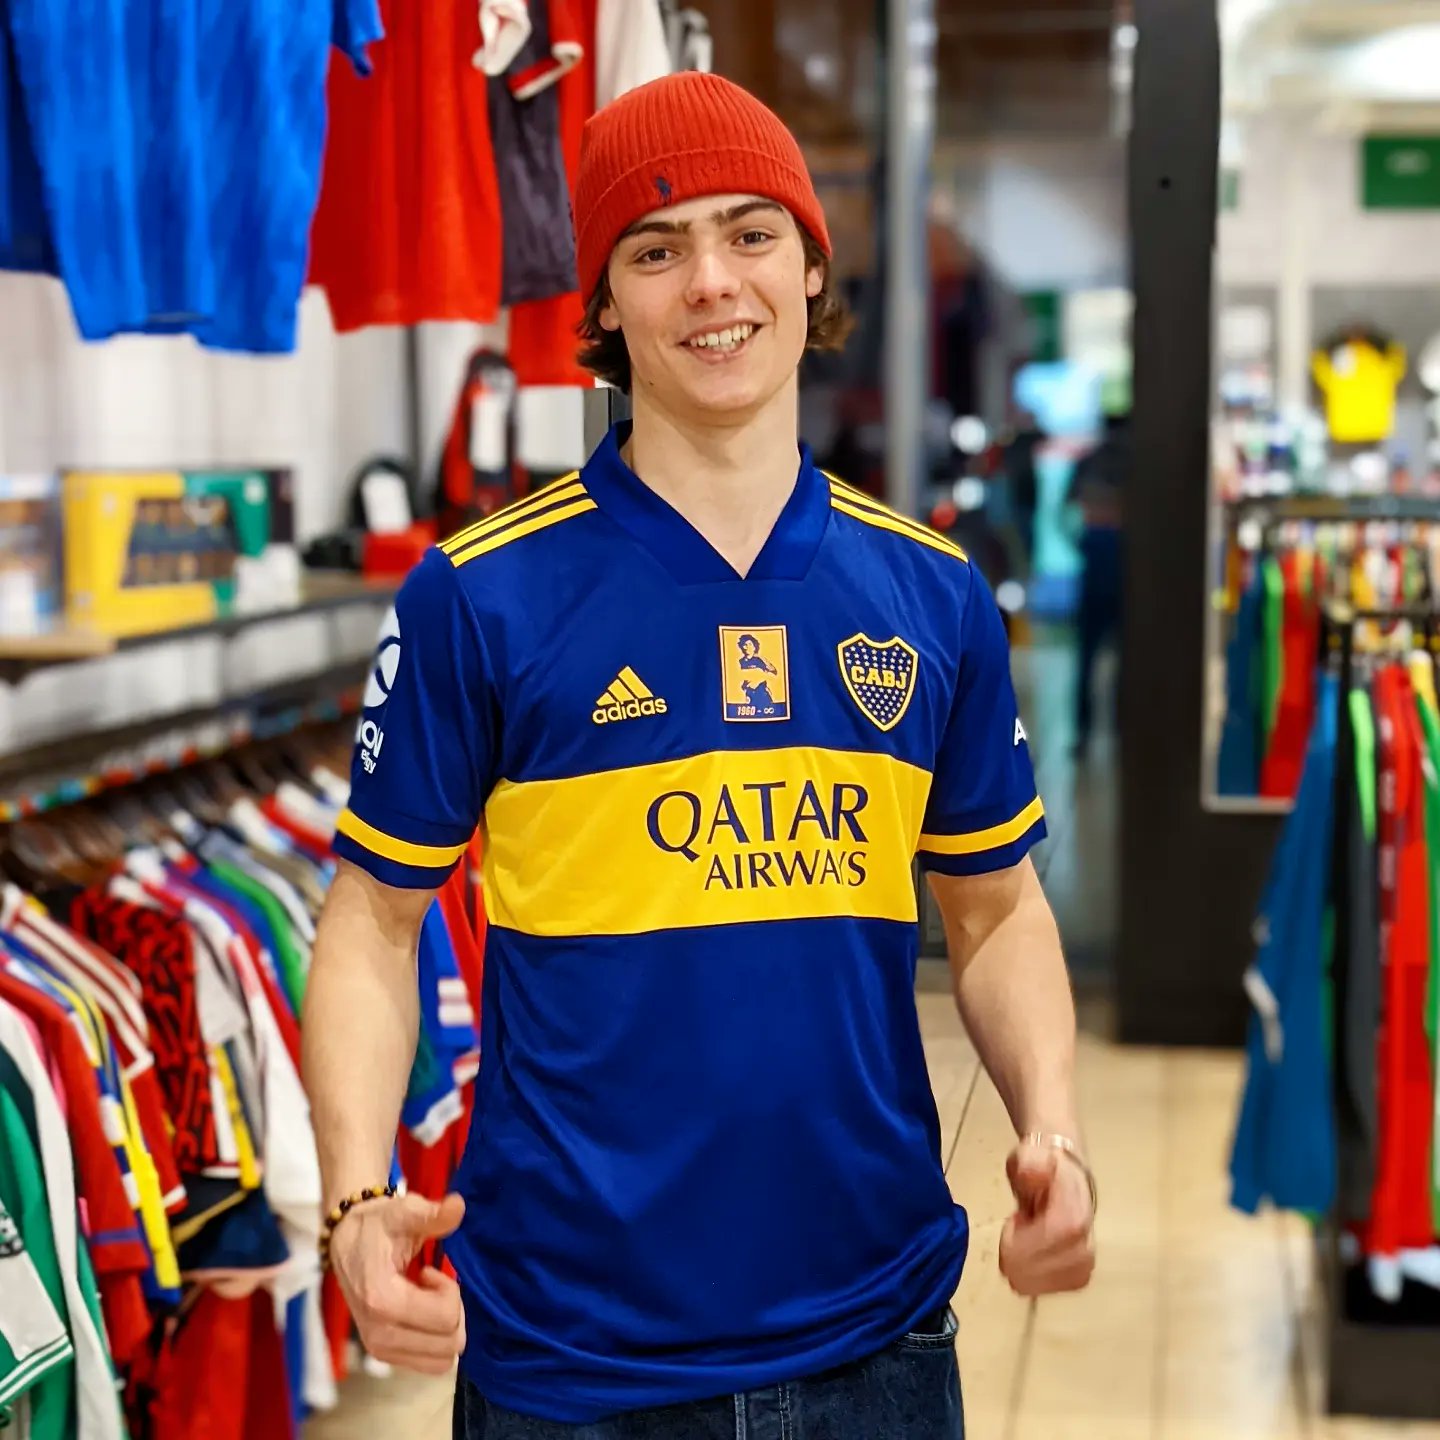 Guarda la ropa girar Alrededor Classic Football Shirts London on Twitter: "Arthur was the first customer  to get one of the Boca Juniors Maradona re-stocks! 👊 We won't expect these  to last long, even the second time